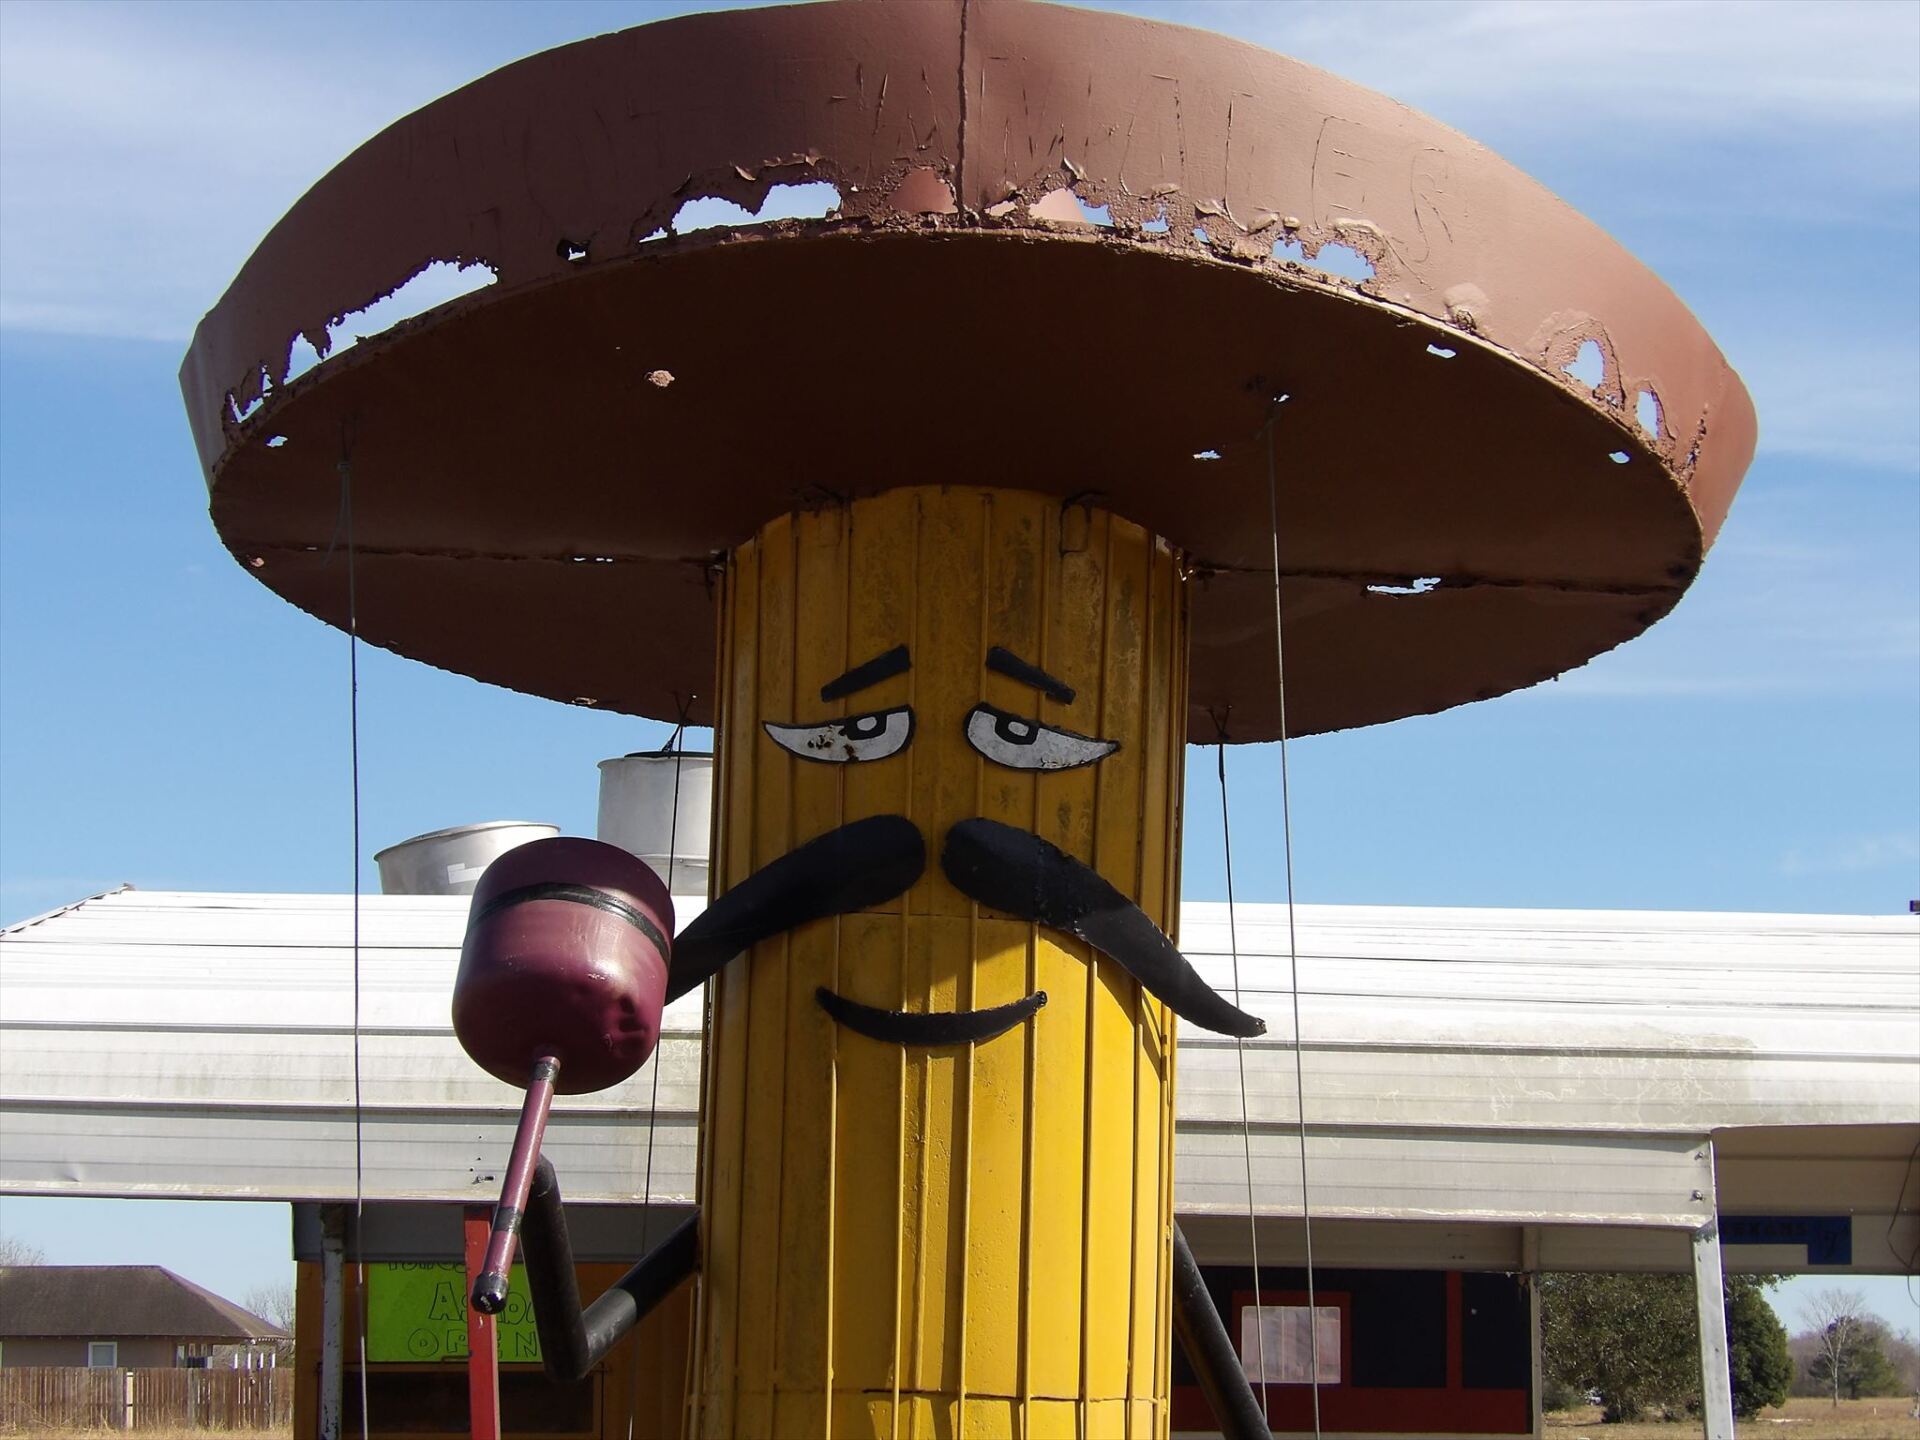 World's Largest Tamale Statue: Alvin, Texas, sets world record